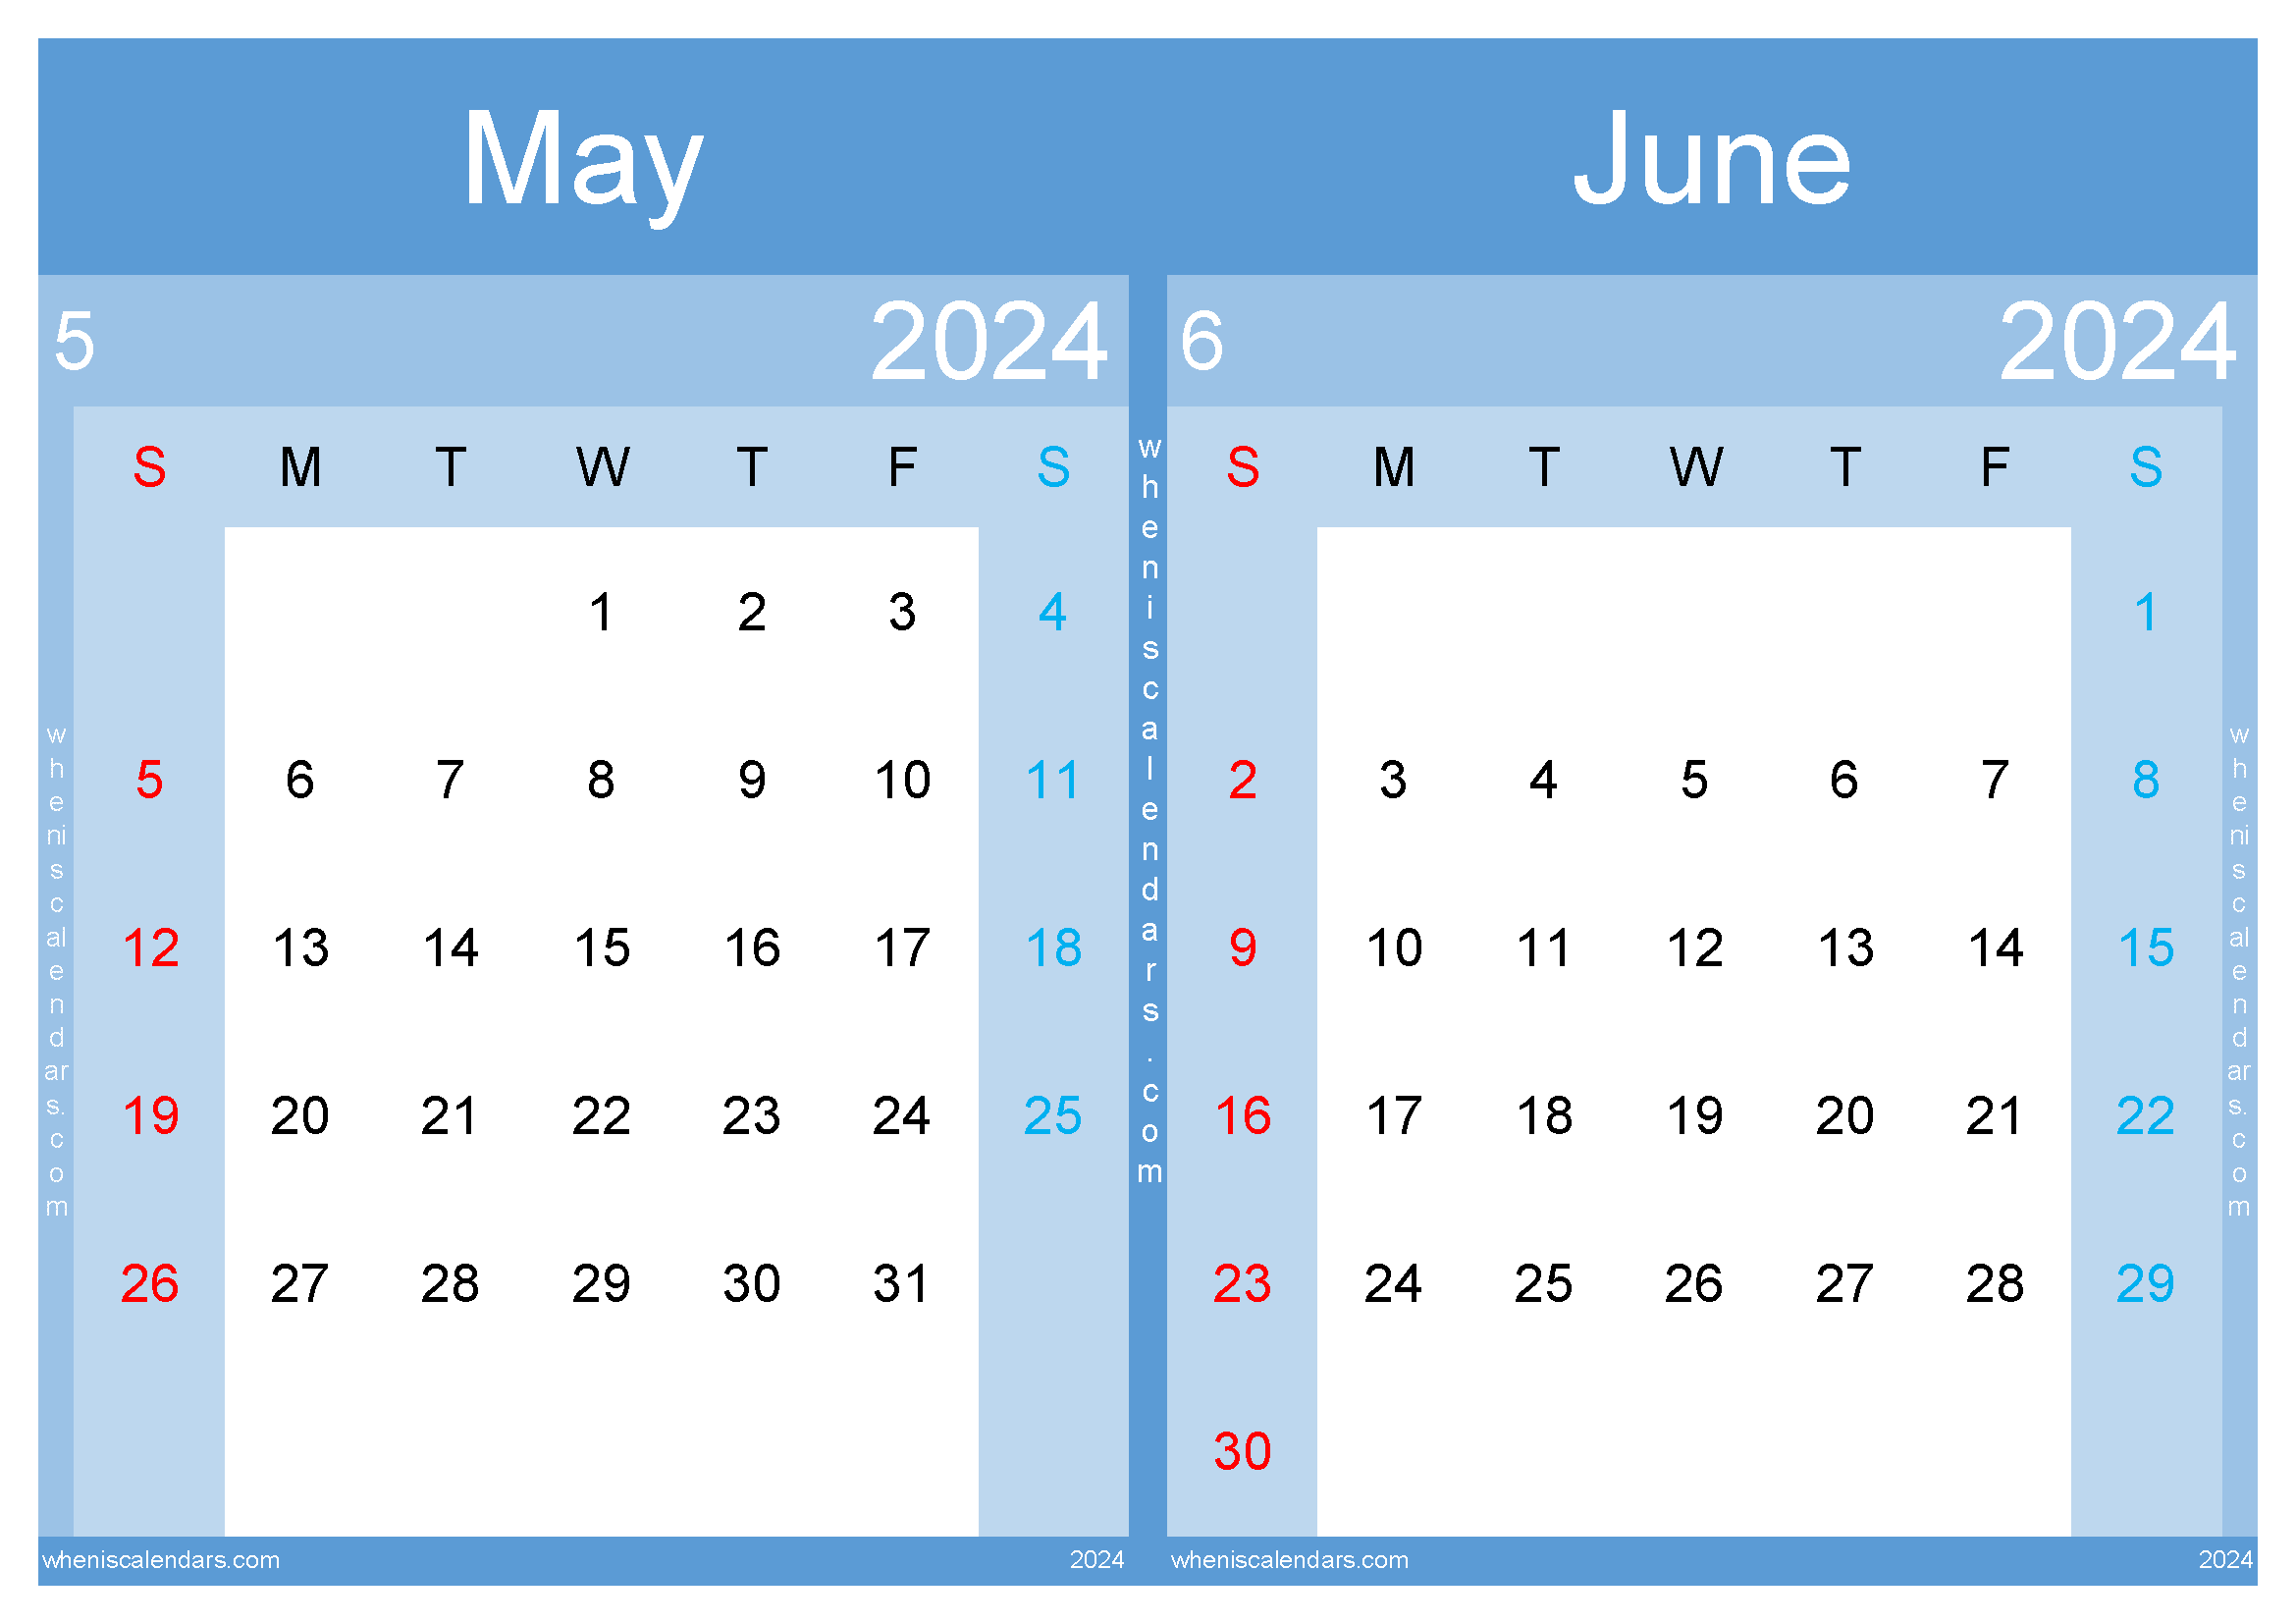 Download calendar of May and June 2024 A4 MJ24038